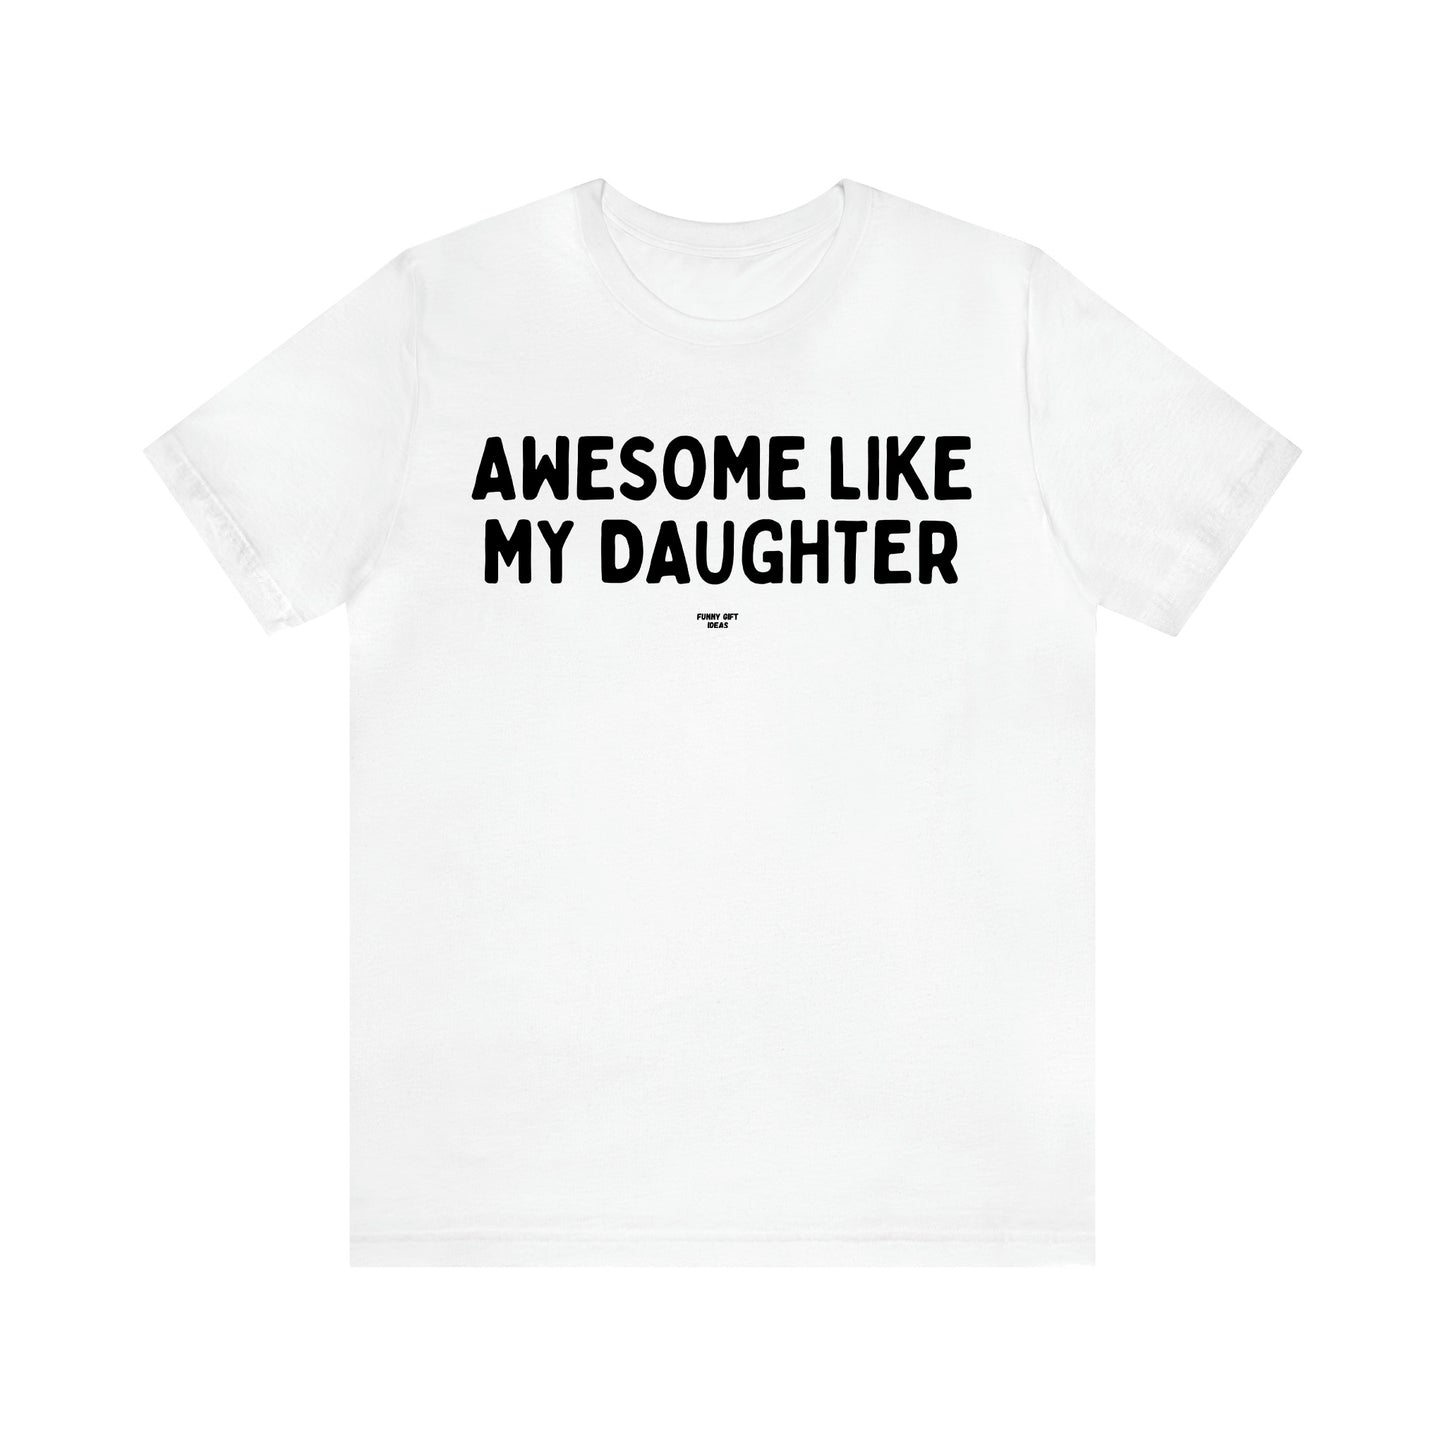 Men's T Shirts Awesome Like My Daughter - Funny Gift Ideas